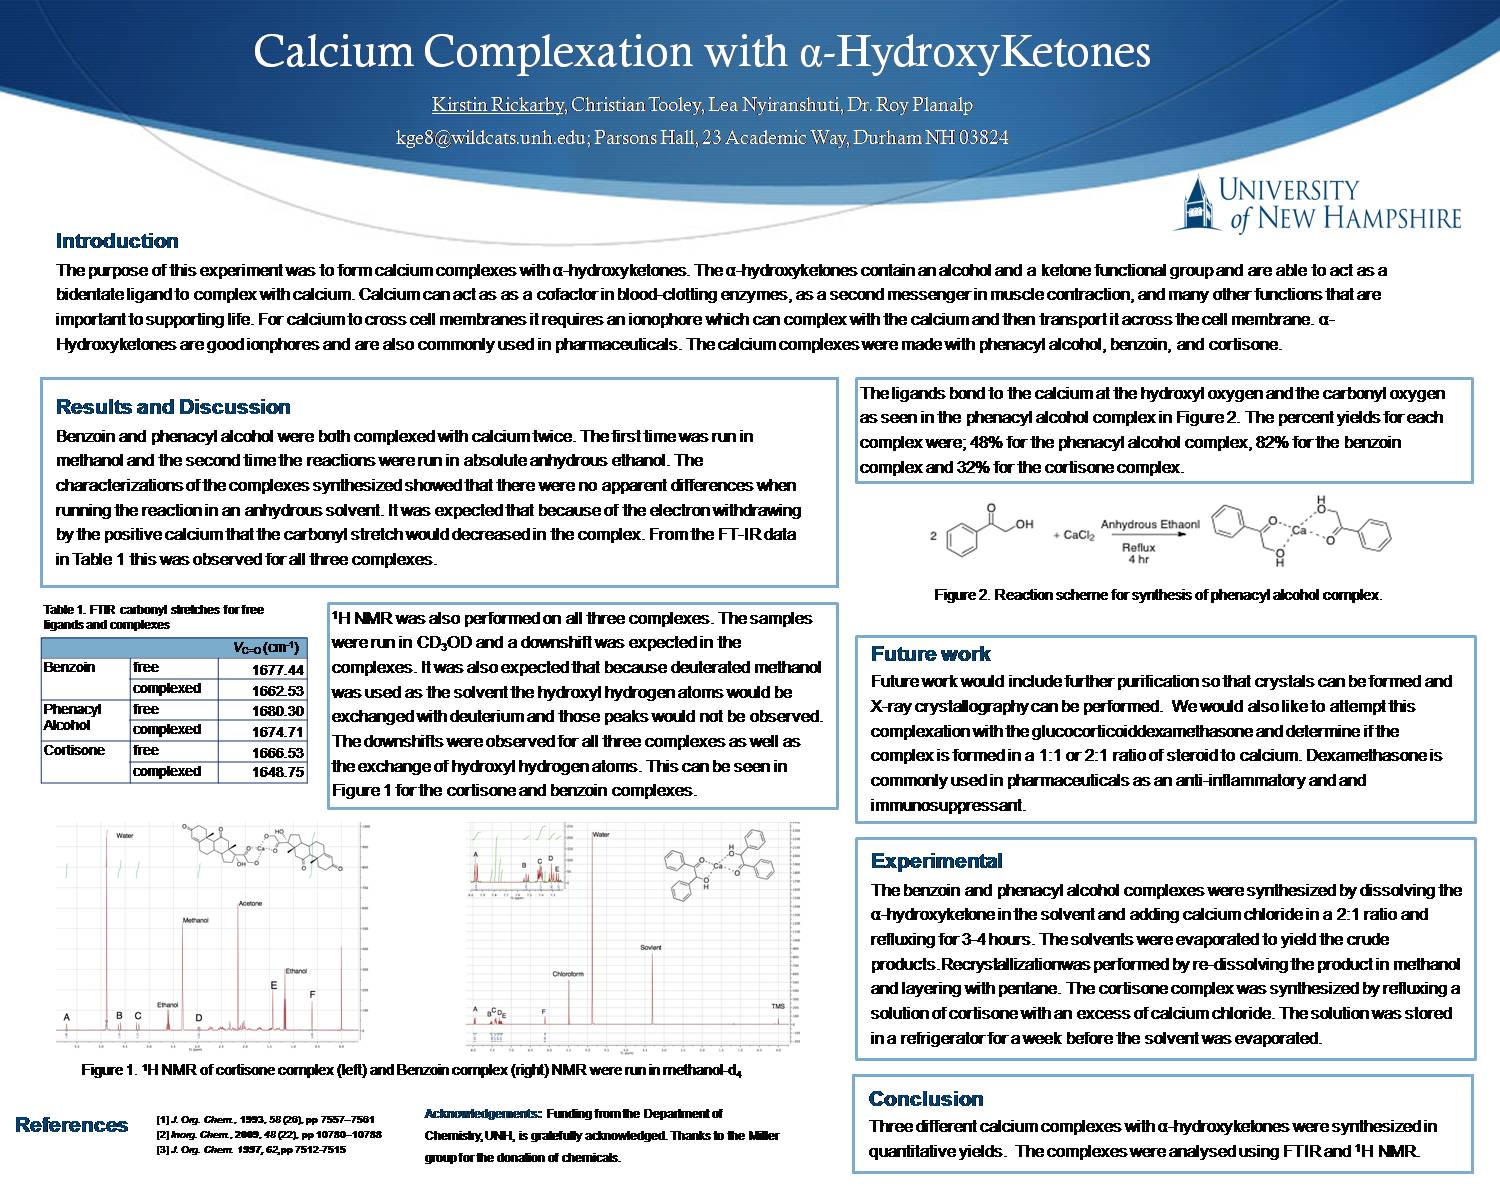 Calcium Complexation With Alpha-Hydroxy Ketones by kge8